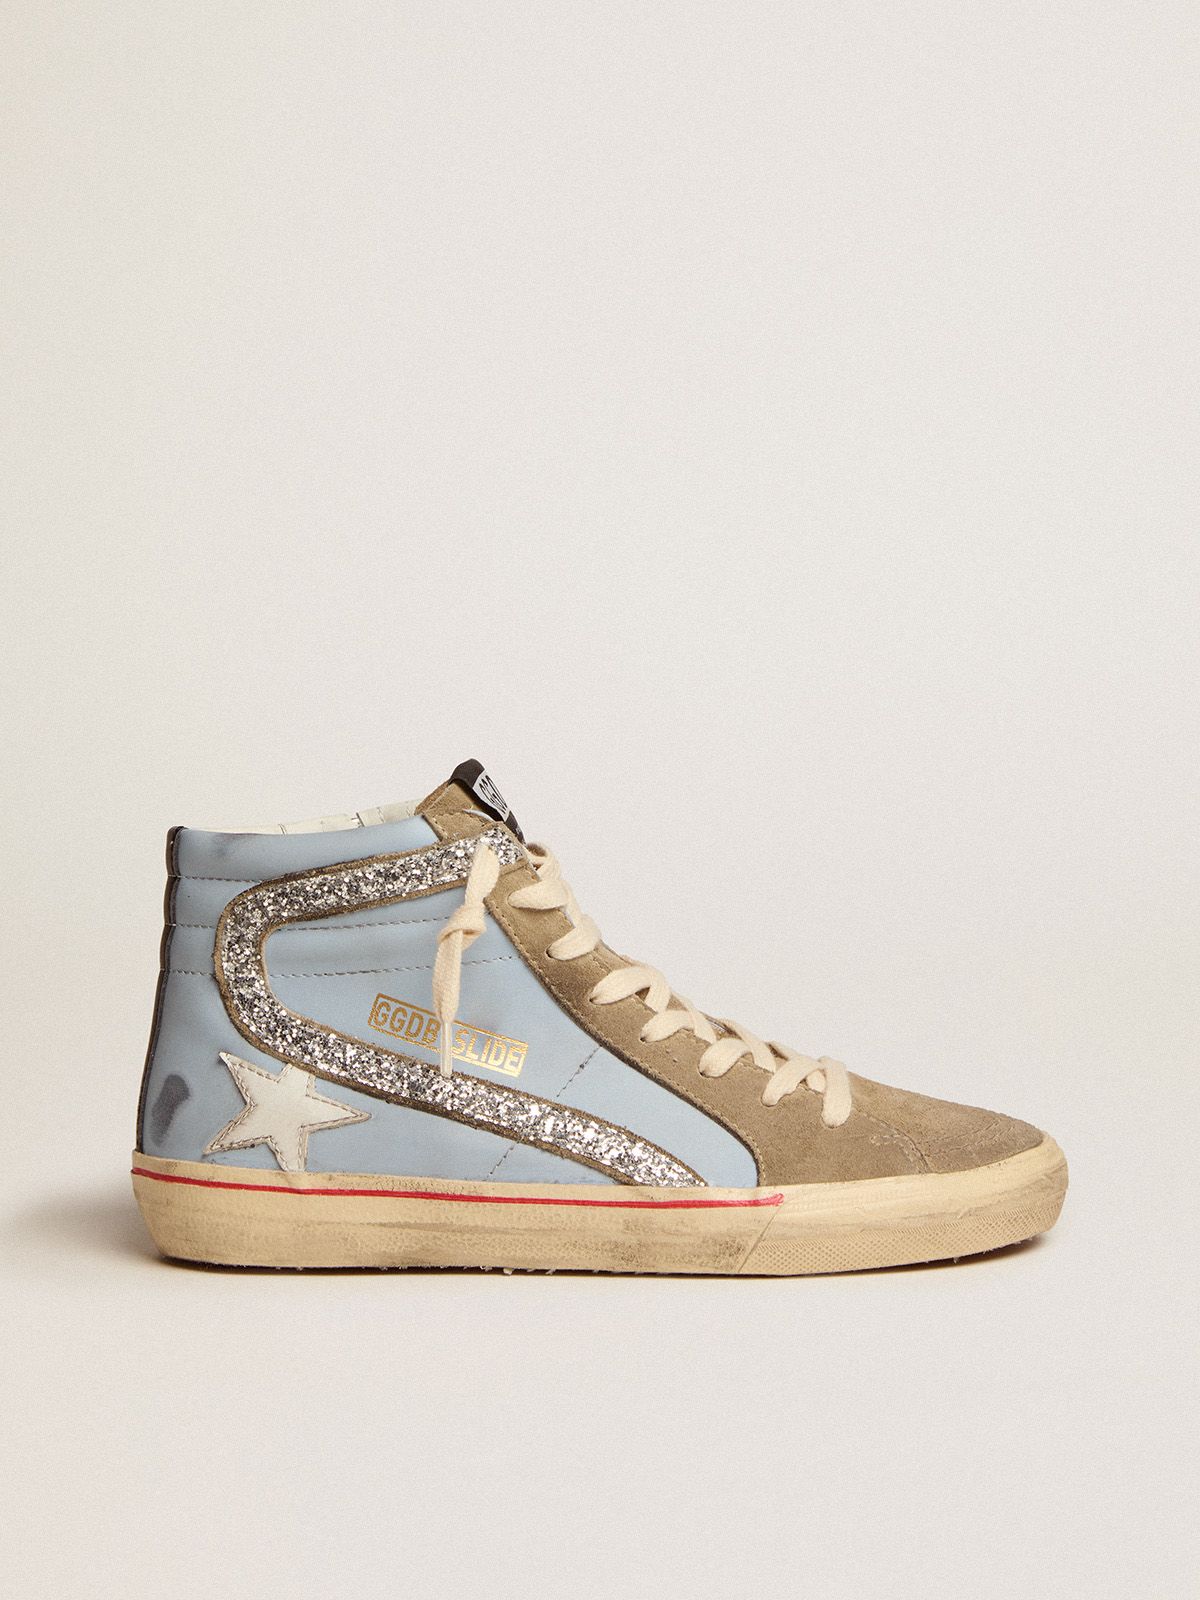 golden goose flash in silver and with glitter dove-gray powder-blue sneakers Slide tongue leather suede